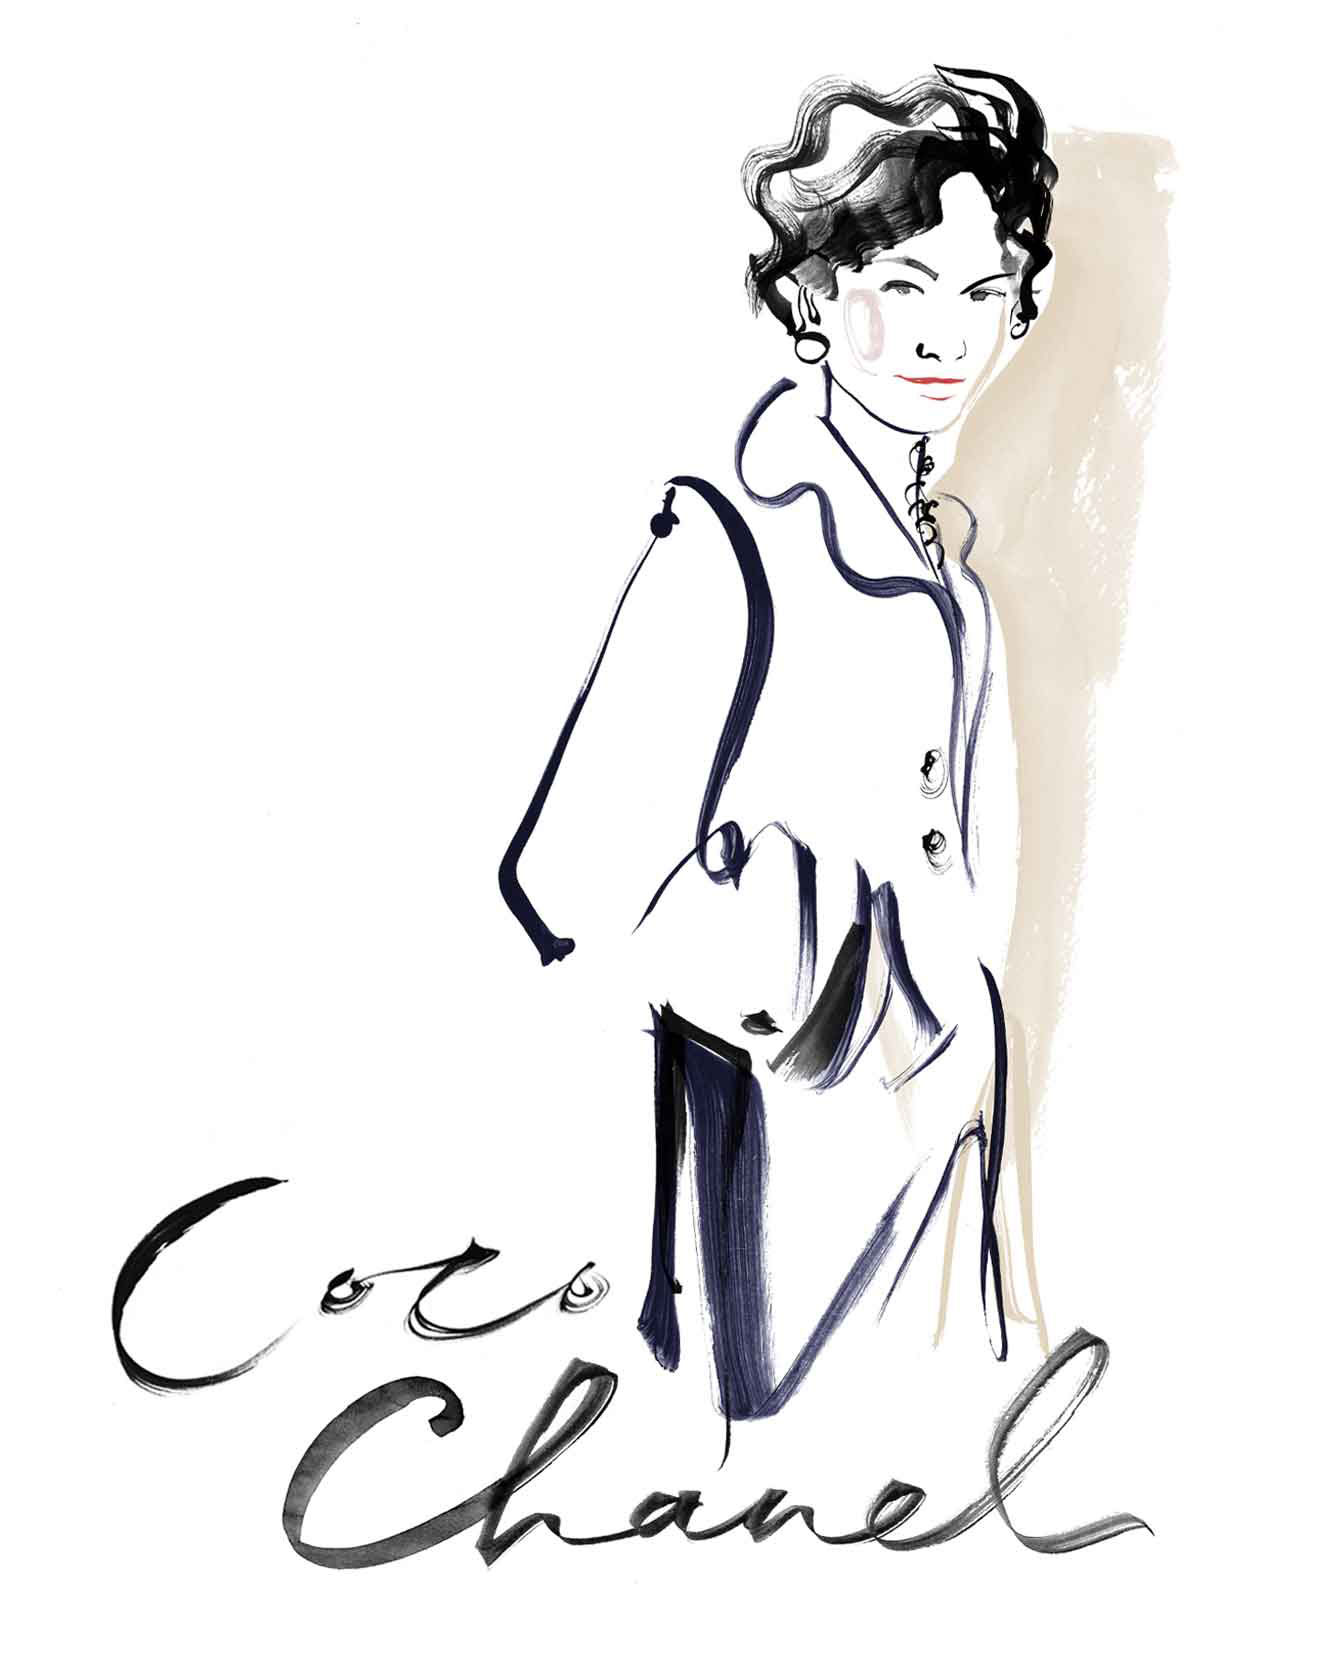 An illustrated portrait of fashion designer Coco Chanel Painted in ink and with expressive brush strokes. Hand painted Coco Chanel name appears in ink. Inspired by the designers sophisticated colour palette and considered use of line.